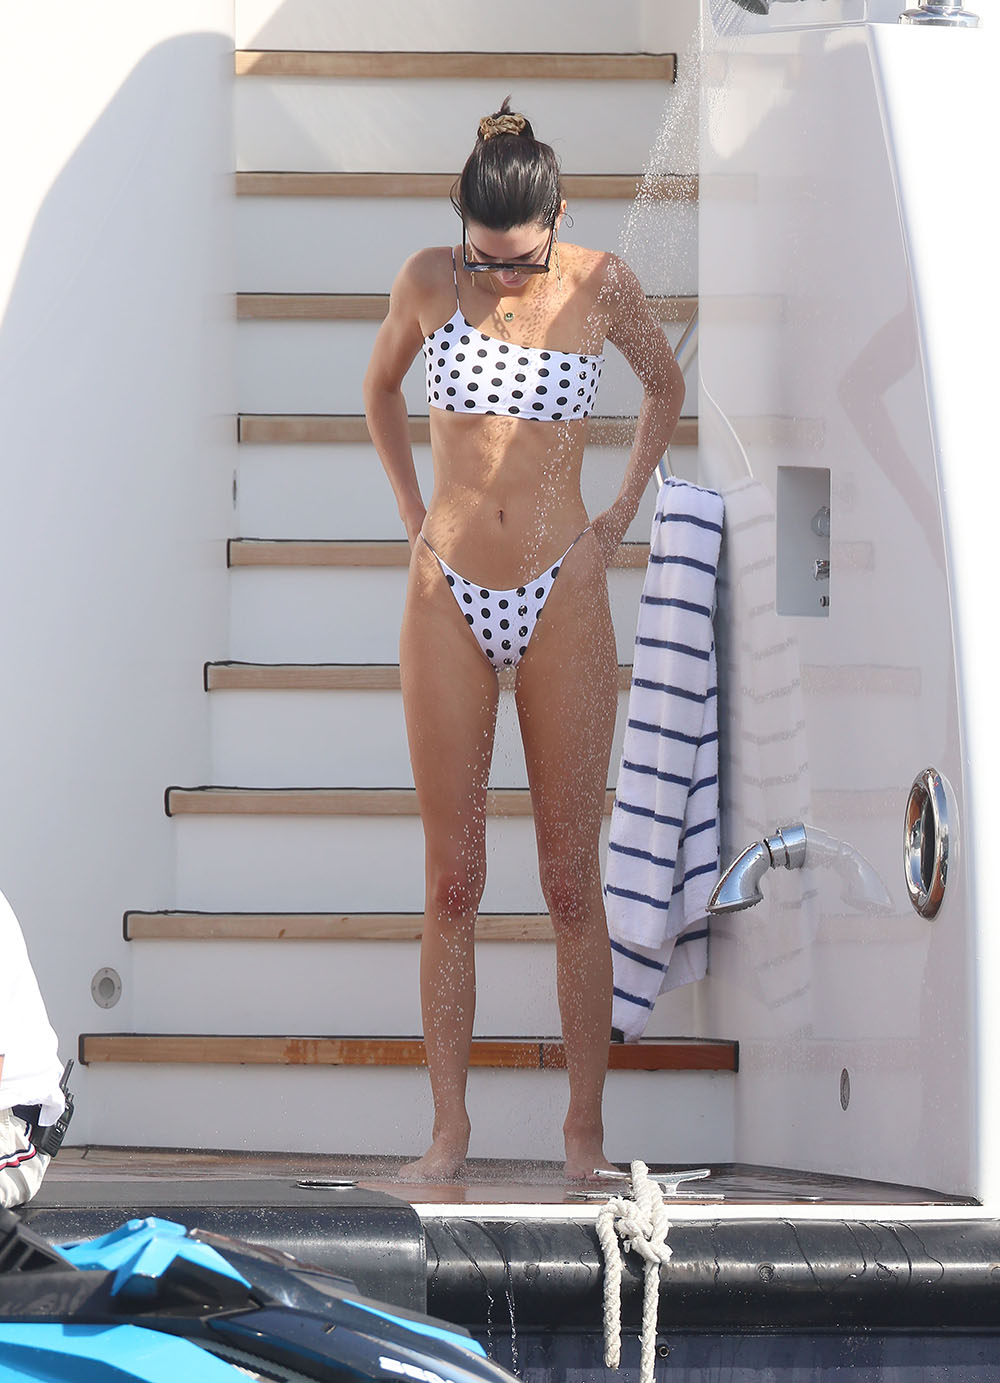 Stars In Polka Dot Bikinis Photos Of Kendall Jenner and More image